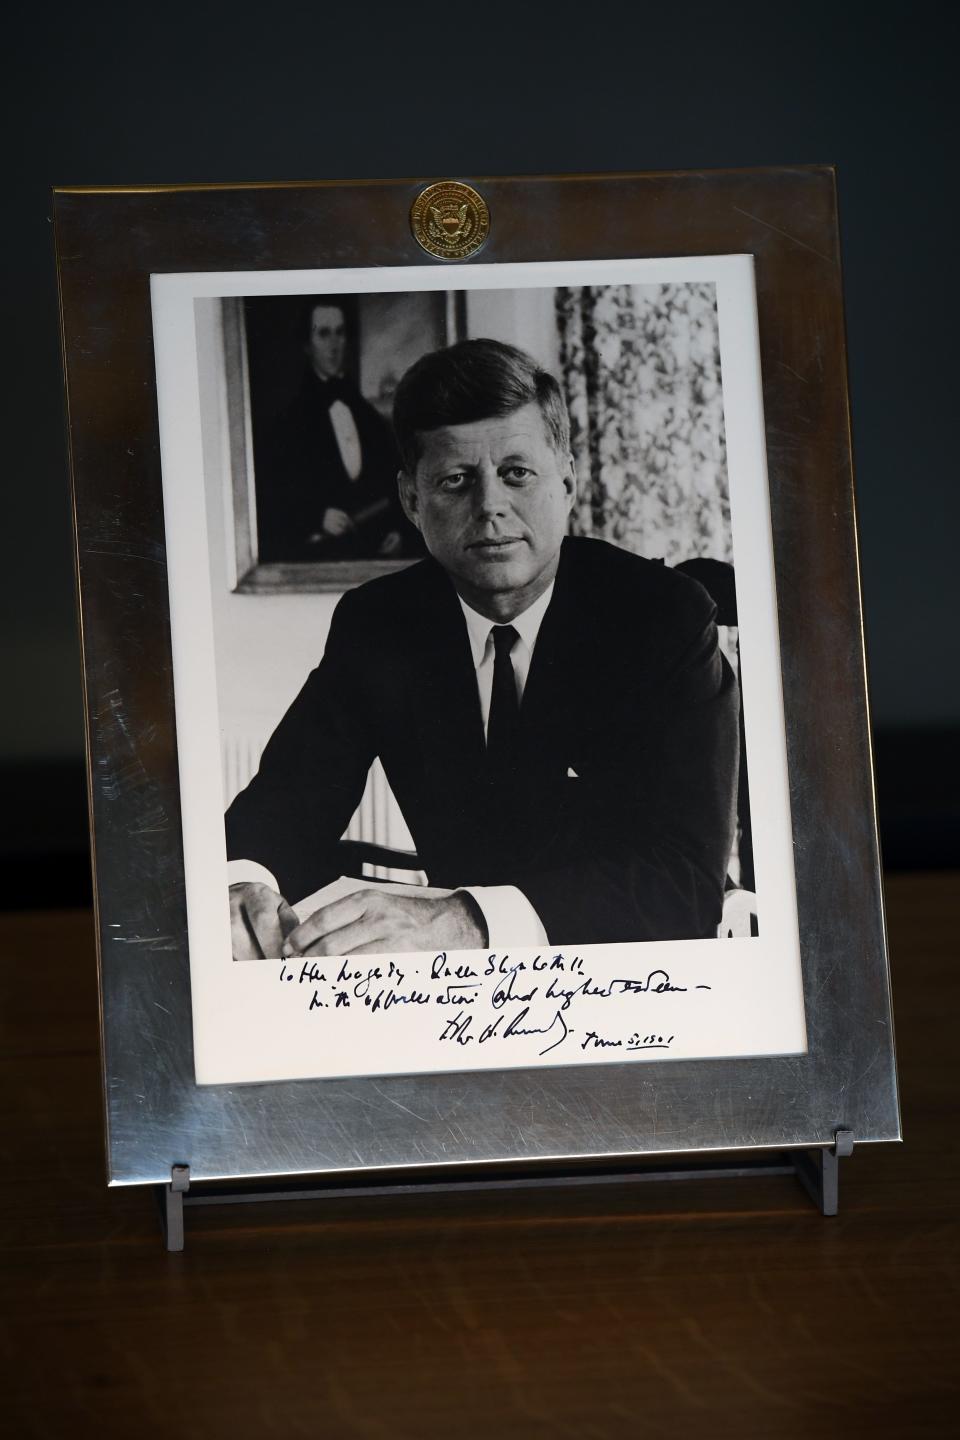 A photograph of President John F. Kennedy inscribed 'To Her Majesty Queen Elizabeth II, with appreciation and highest esteem, John F. Kennedy' in a Tiffany and Co. frame that was given to Queen Elizabeth II by John F. Kennedy at Buckingham Palace in 1961.